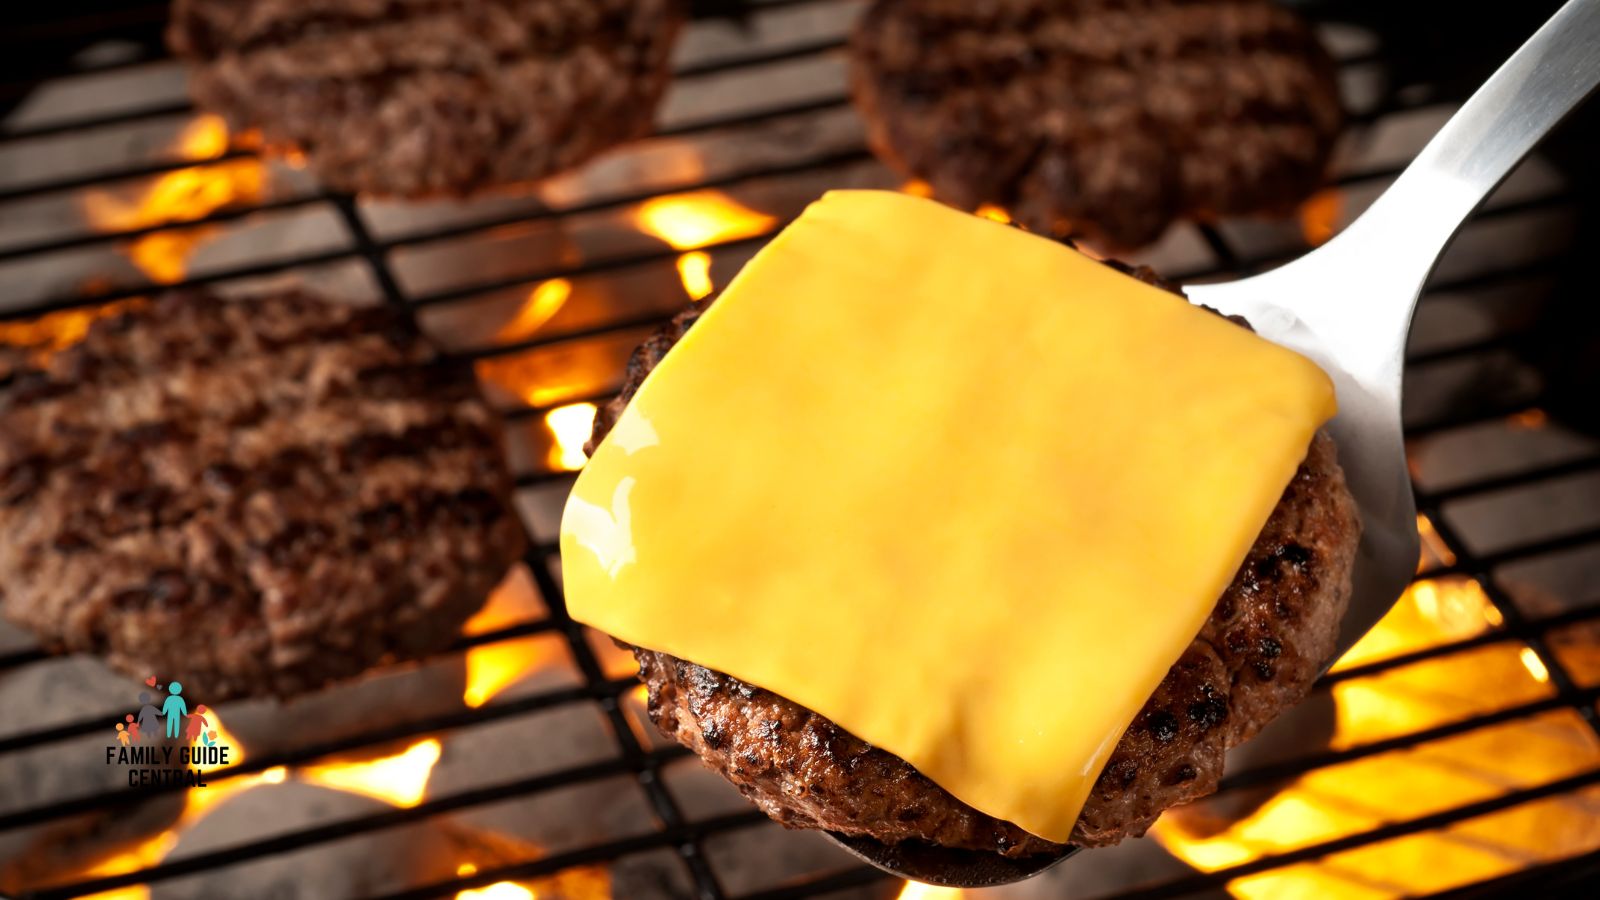 Cooking cheese burgers on a pellet grill - familyguidecentral.com